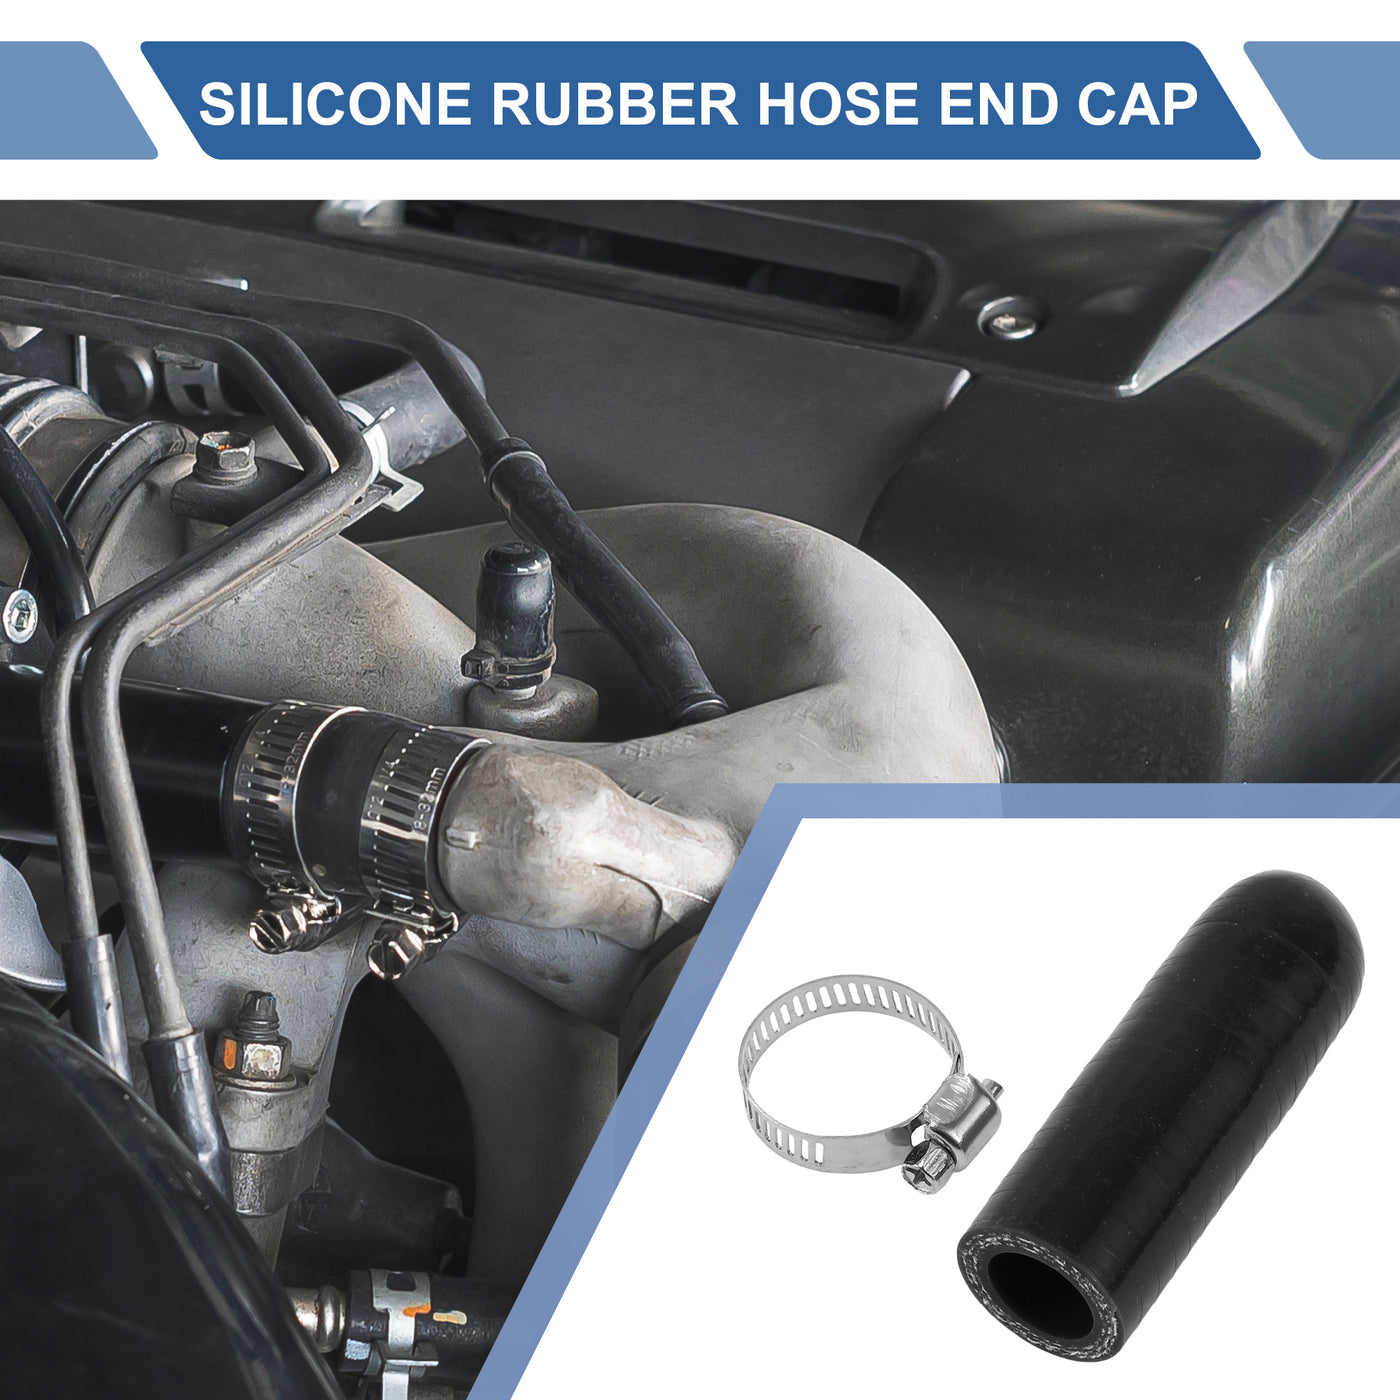 X AUTOHAUX 1 Pcs 60mm Length 16mm/0.63" ID Black Car Silicone Rubber Hose End Cap with Clamp Silicone Reinforced Blanking Cap for Bypass Tube Universal